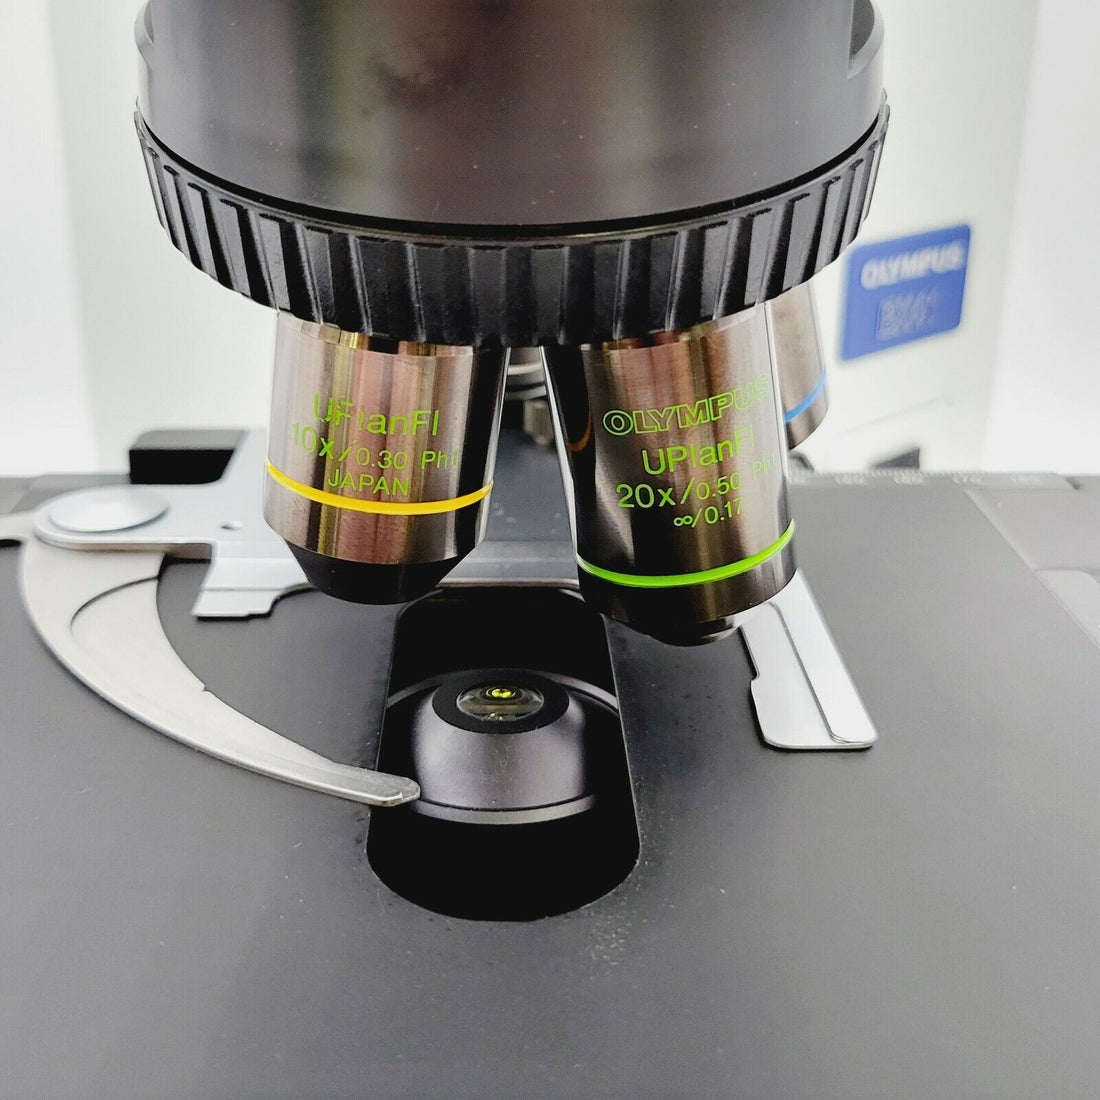 How does a Phase Contrast Microscope work?